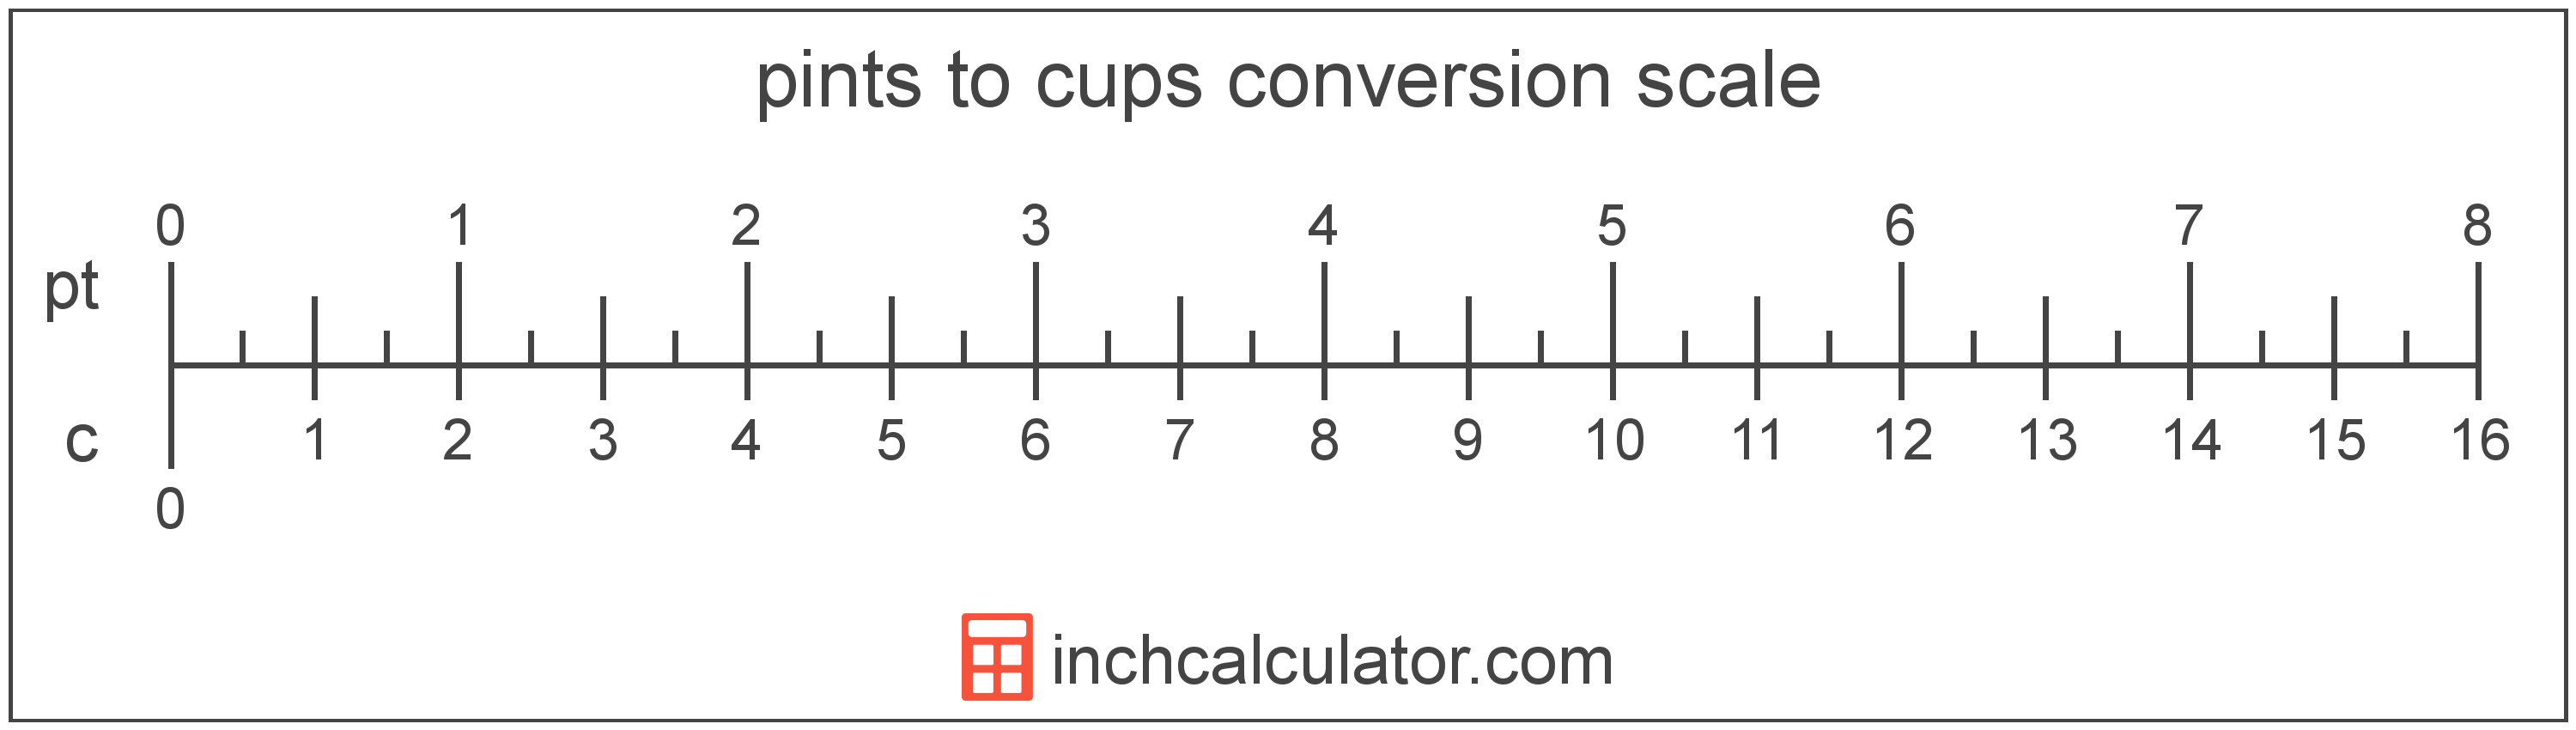 Pints to Cups Converter: How Many Cups in a Pint?